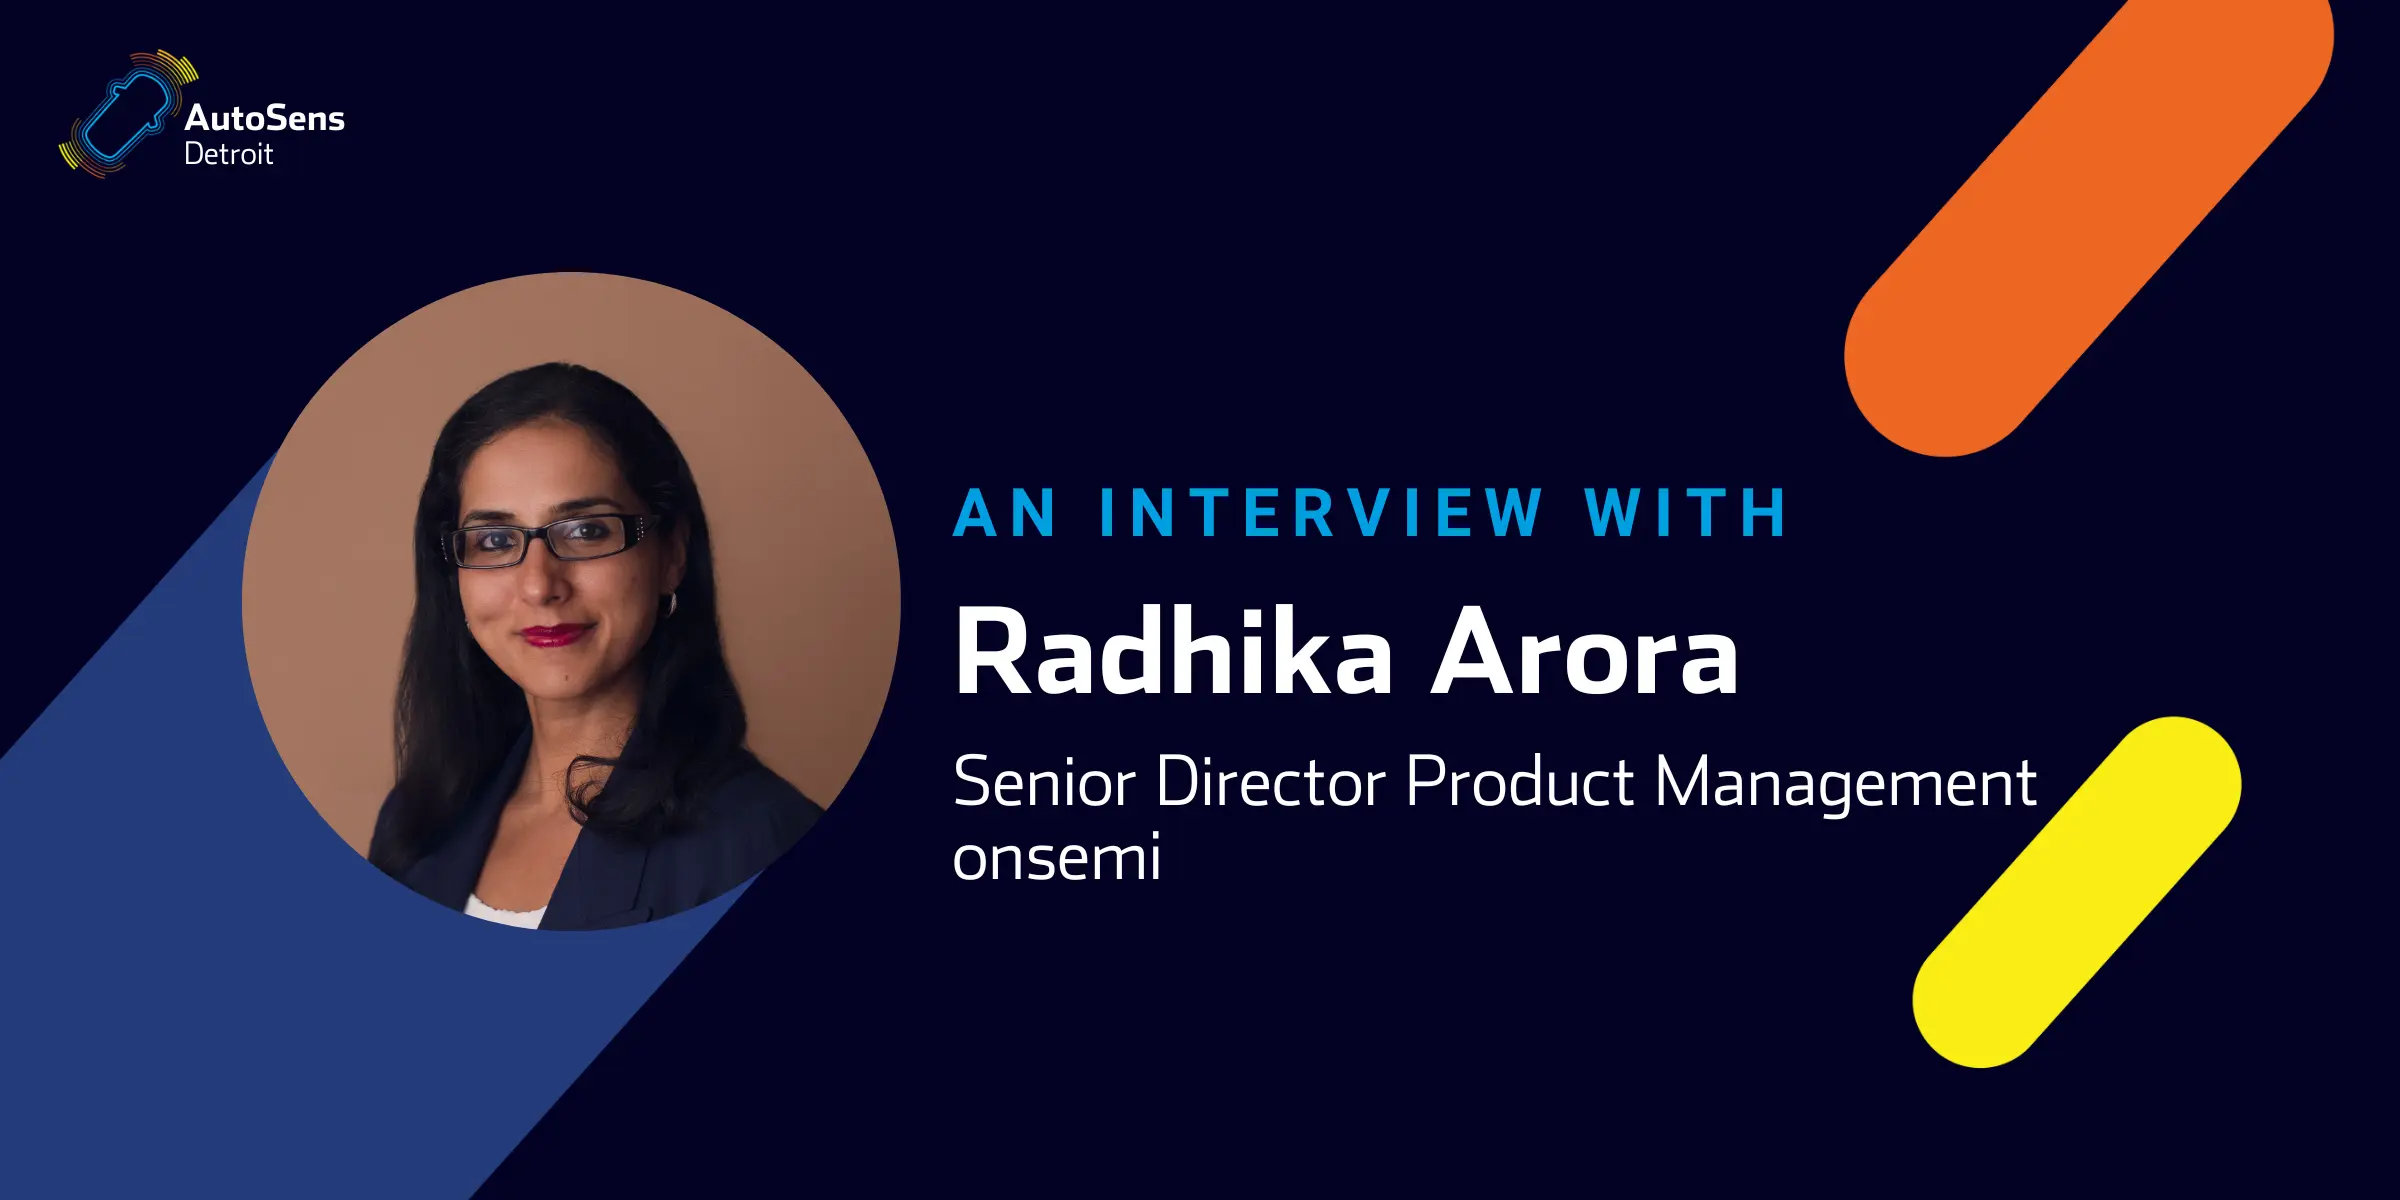 An Interview with Radhika Arora, Senior Director, Product Management at onsemi